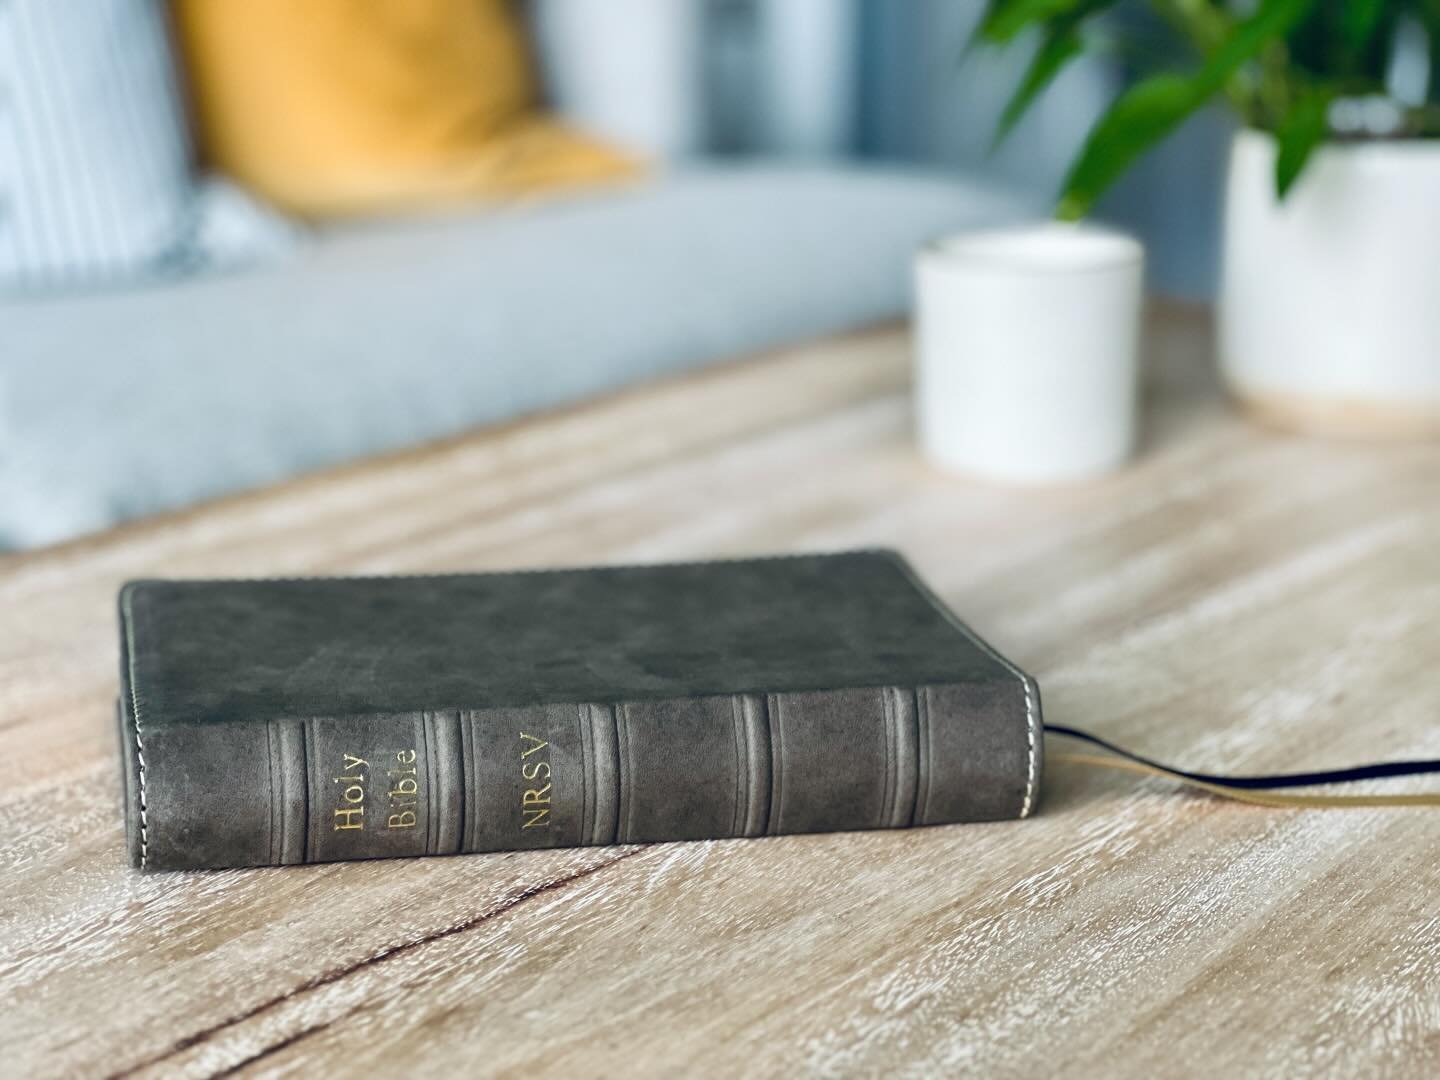 Introducing Floresh Bibles&hellip; I have never seen a Bible quite like this before. New video up now over on YouTube (link in bio).

@floresh_bibles 
#bible #rebind